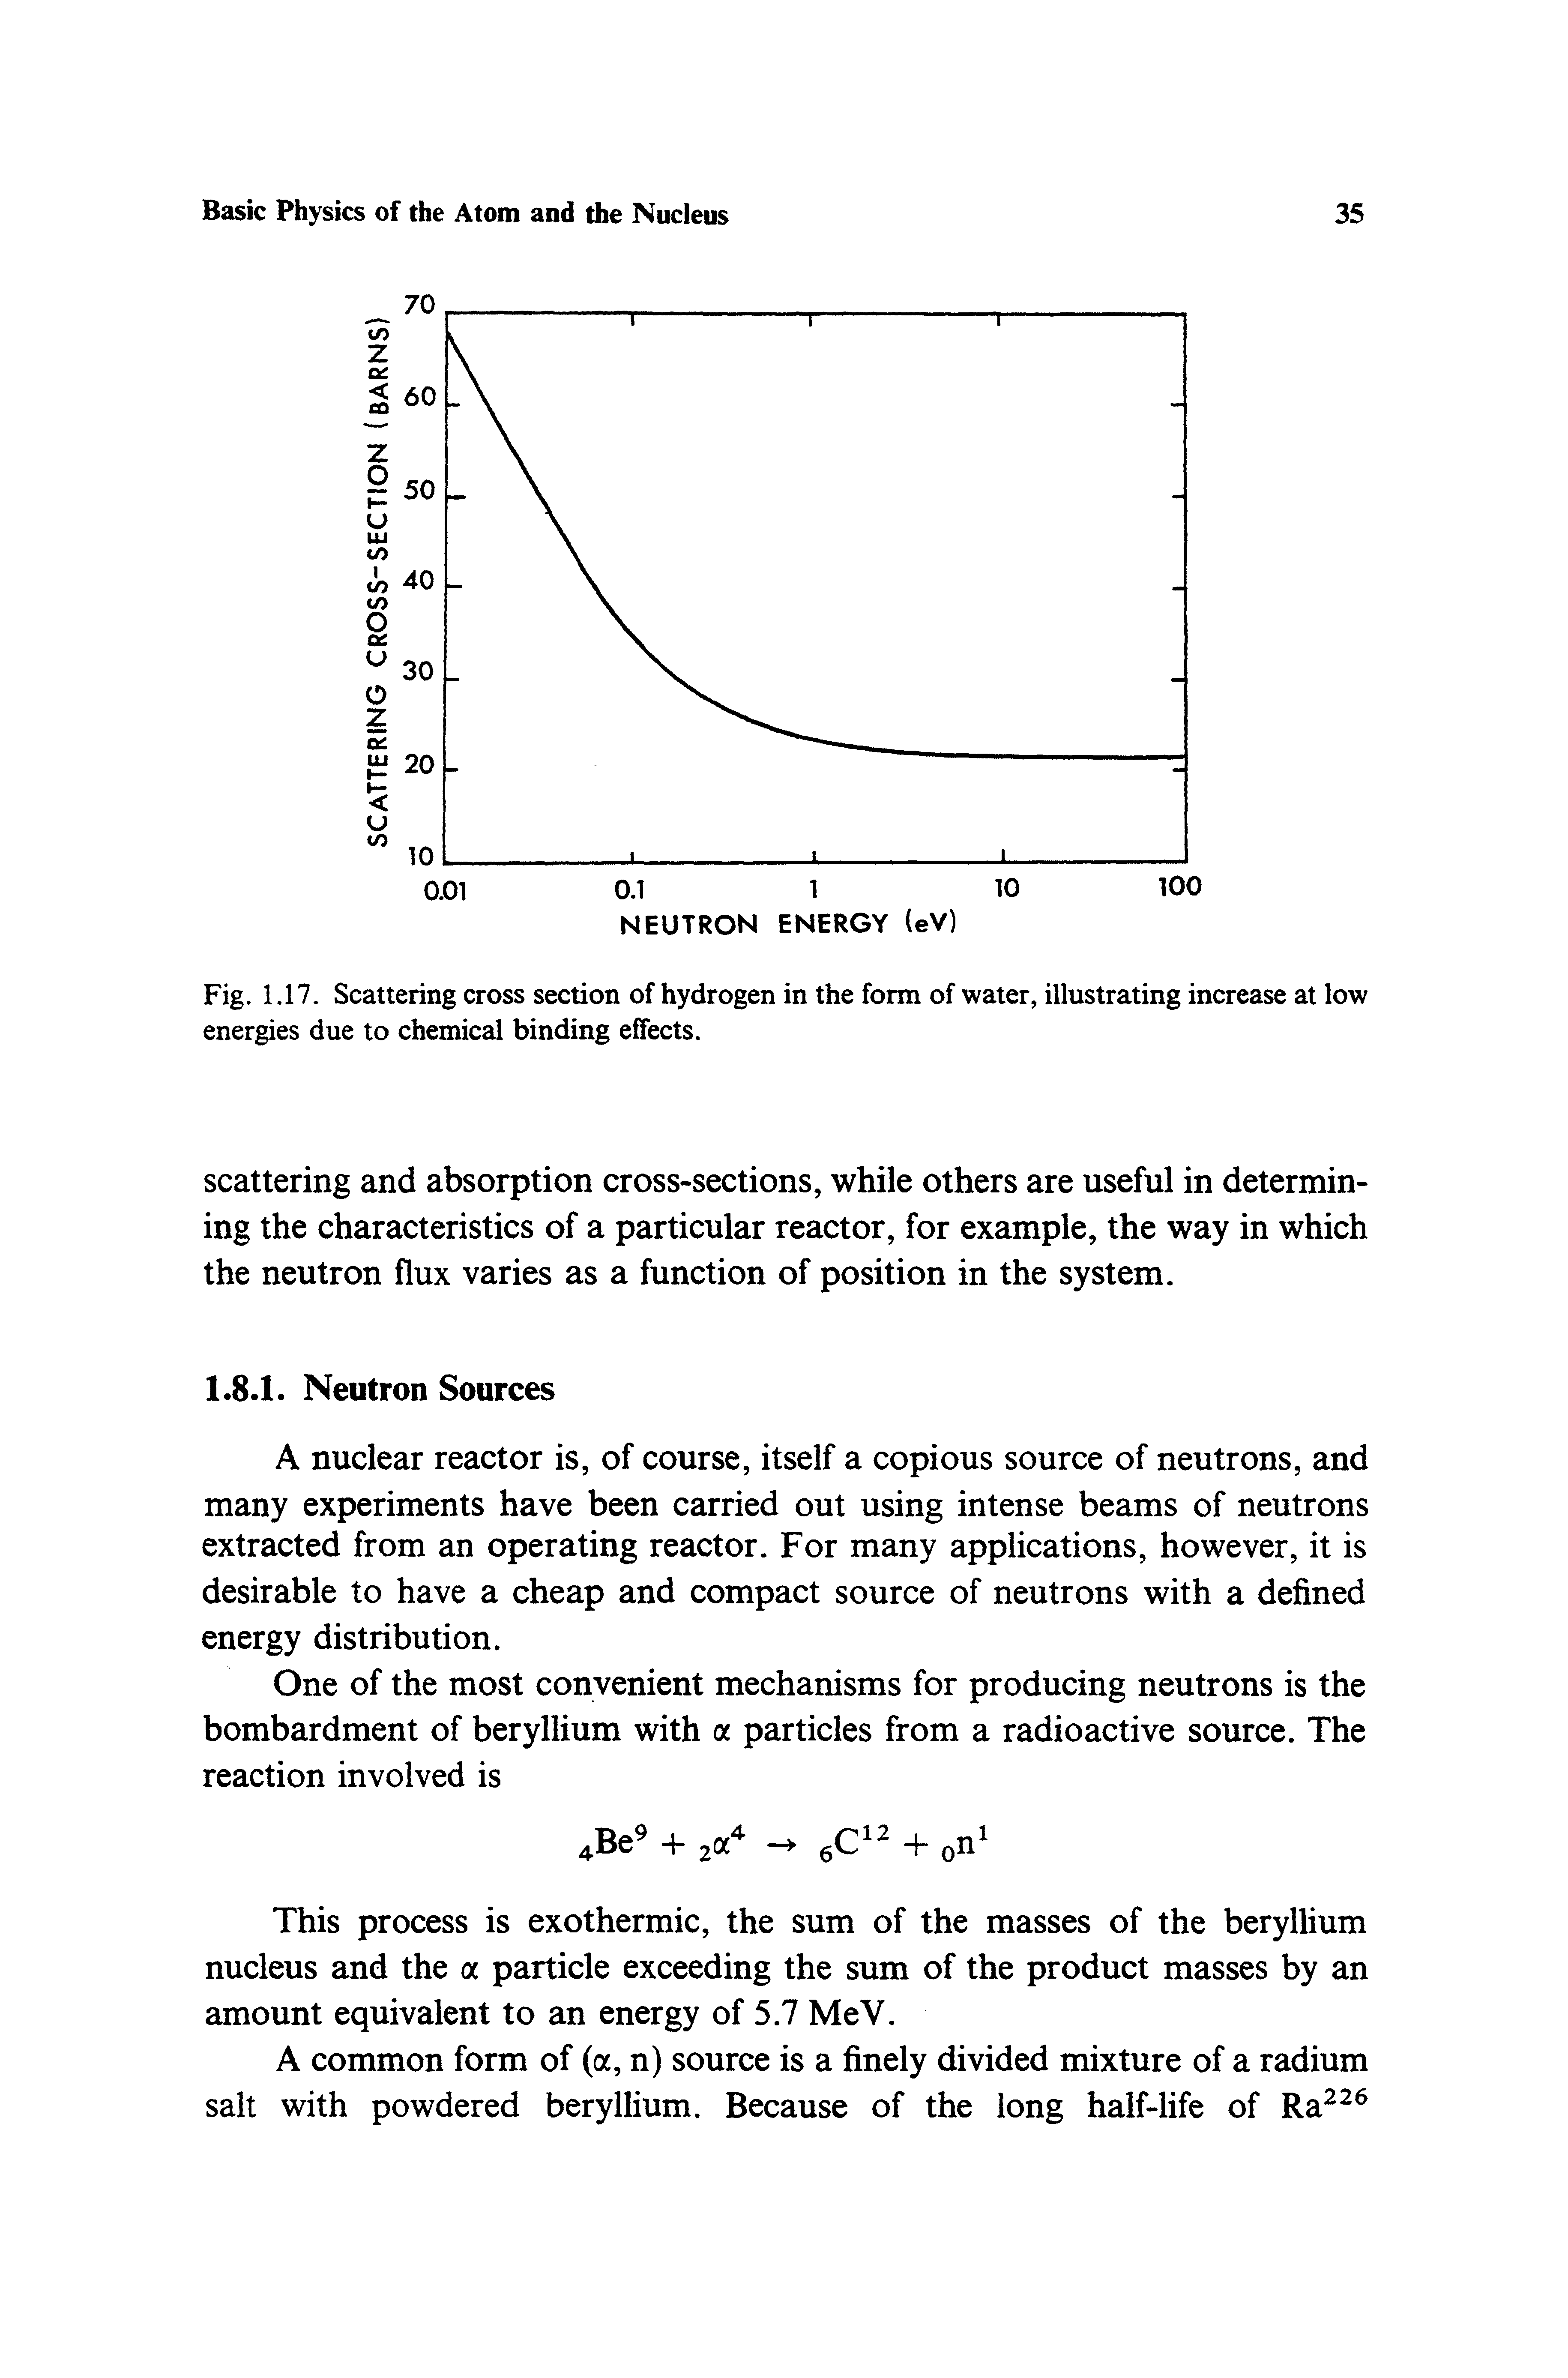 Fig. 1.17. Scattering cross section of hydrogen in the form of water, illustrating increase at low energies due to chemical binding effects.